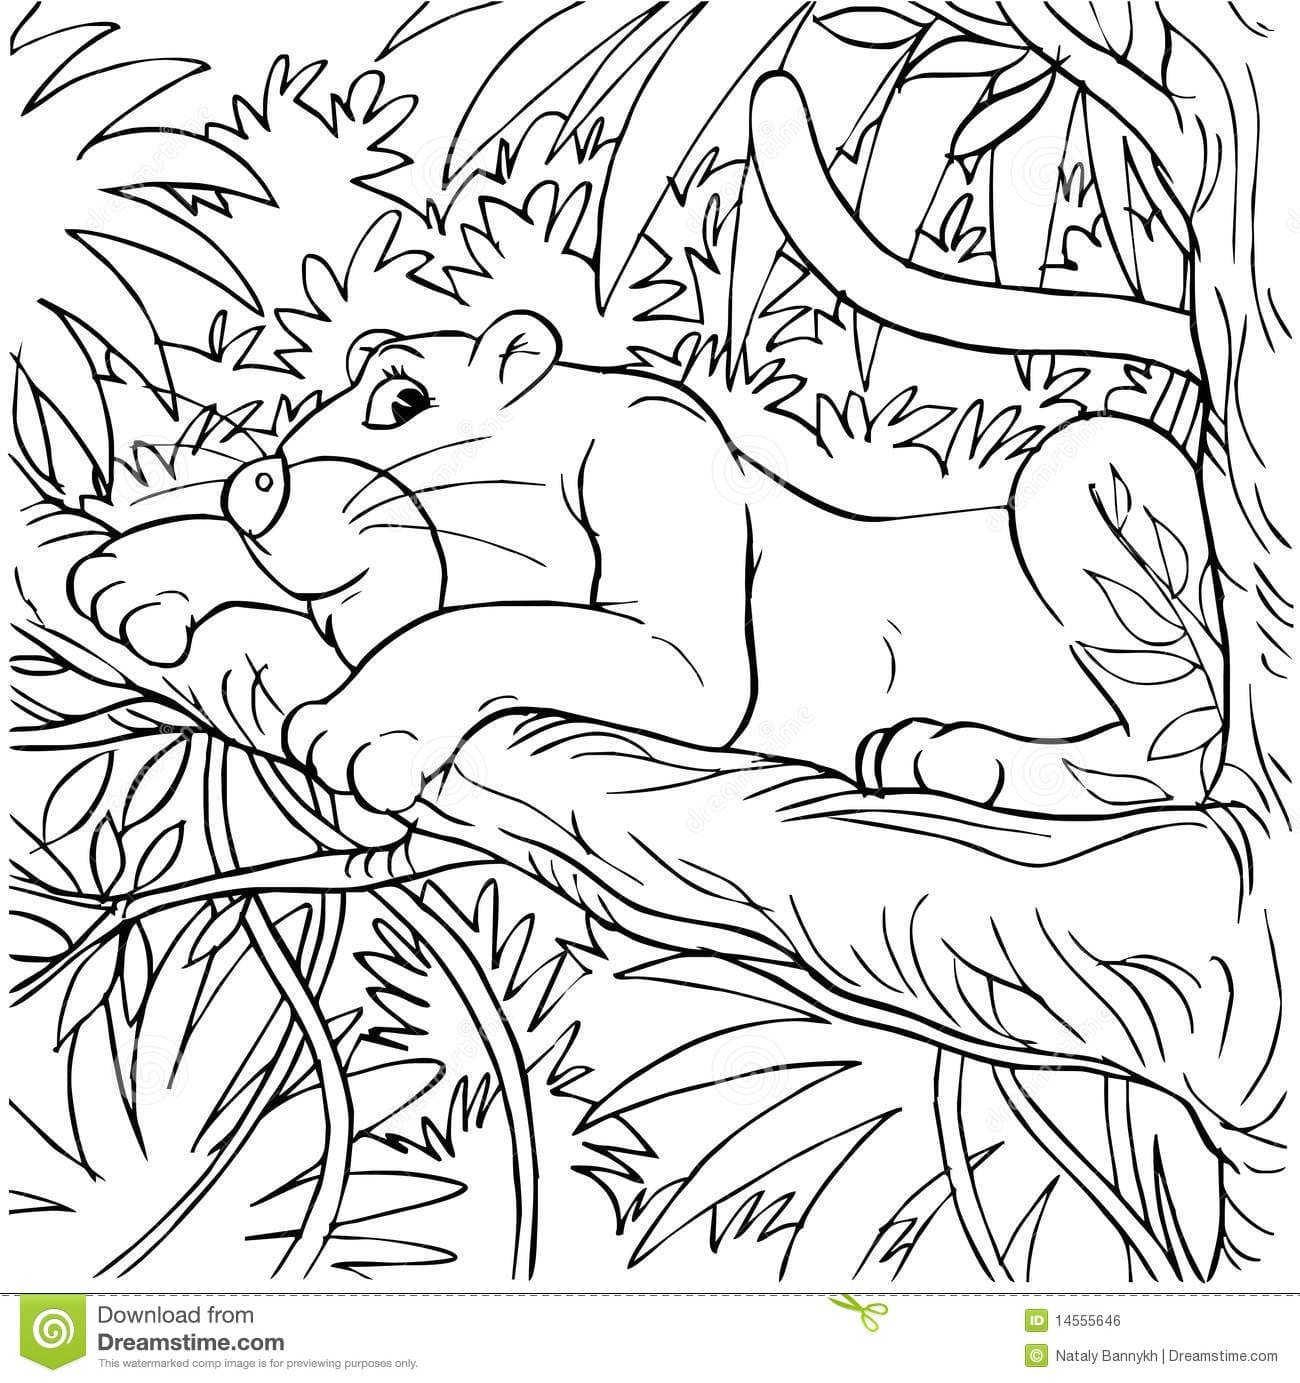 Cute Panther Free Coloring Page